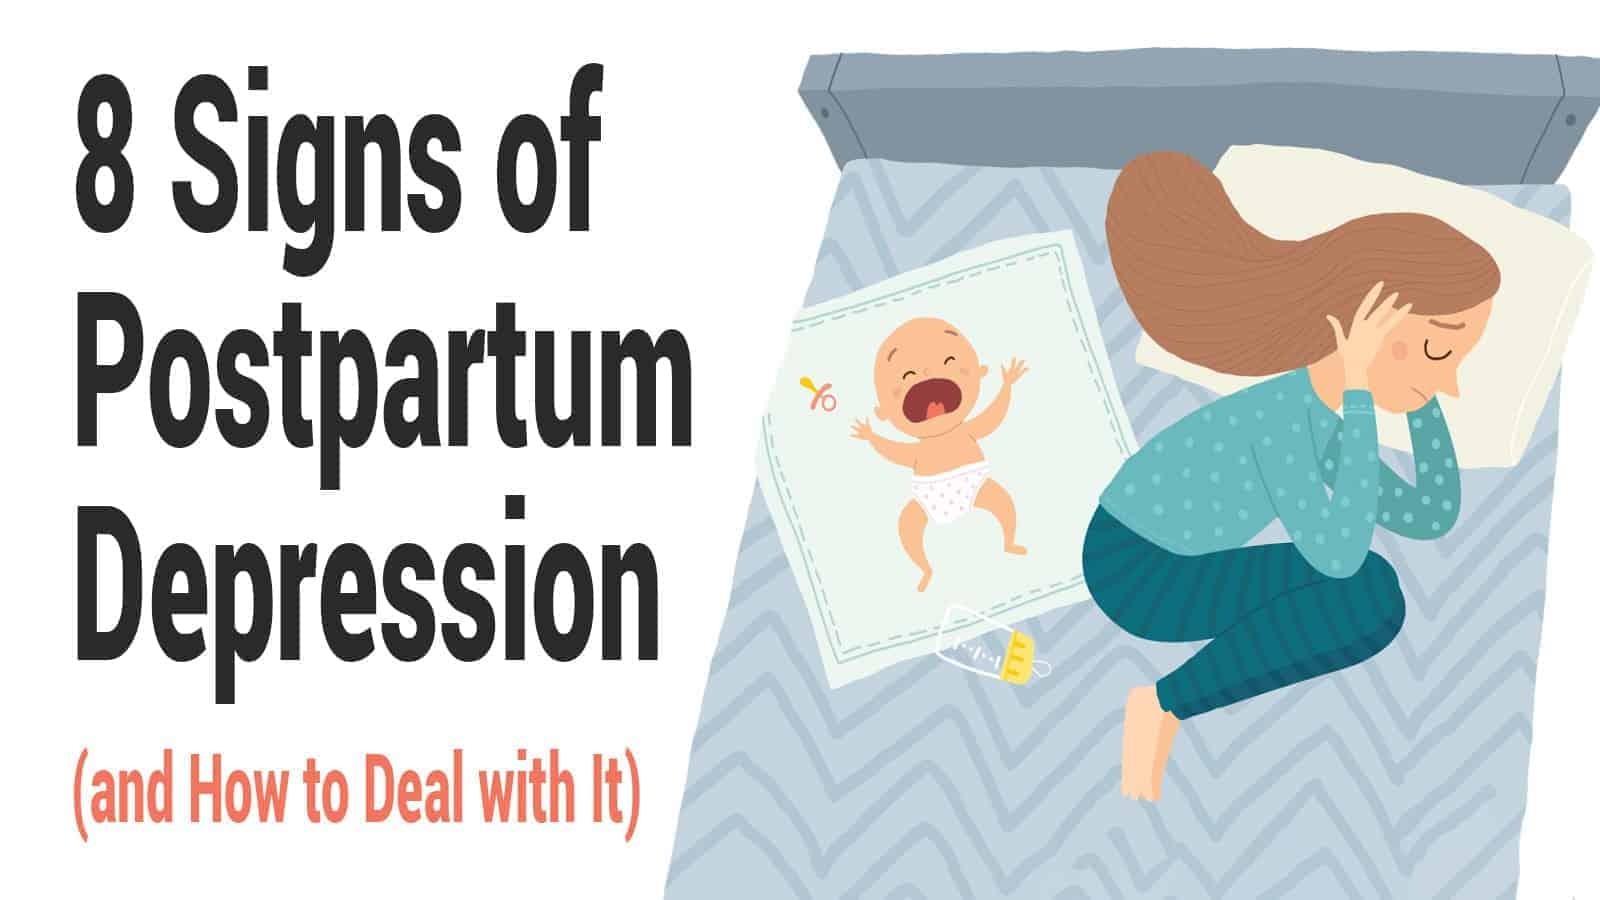 8 Signs of Postpartum Depression (and How to Deal with It)